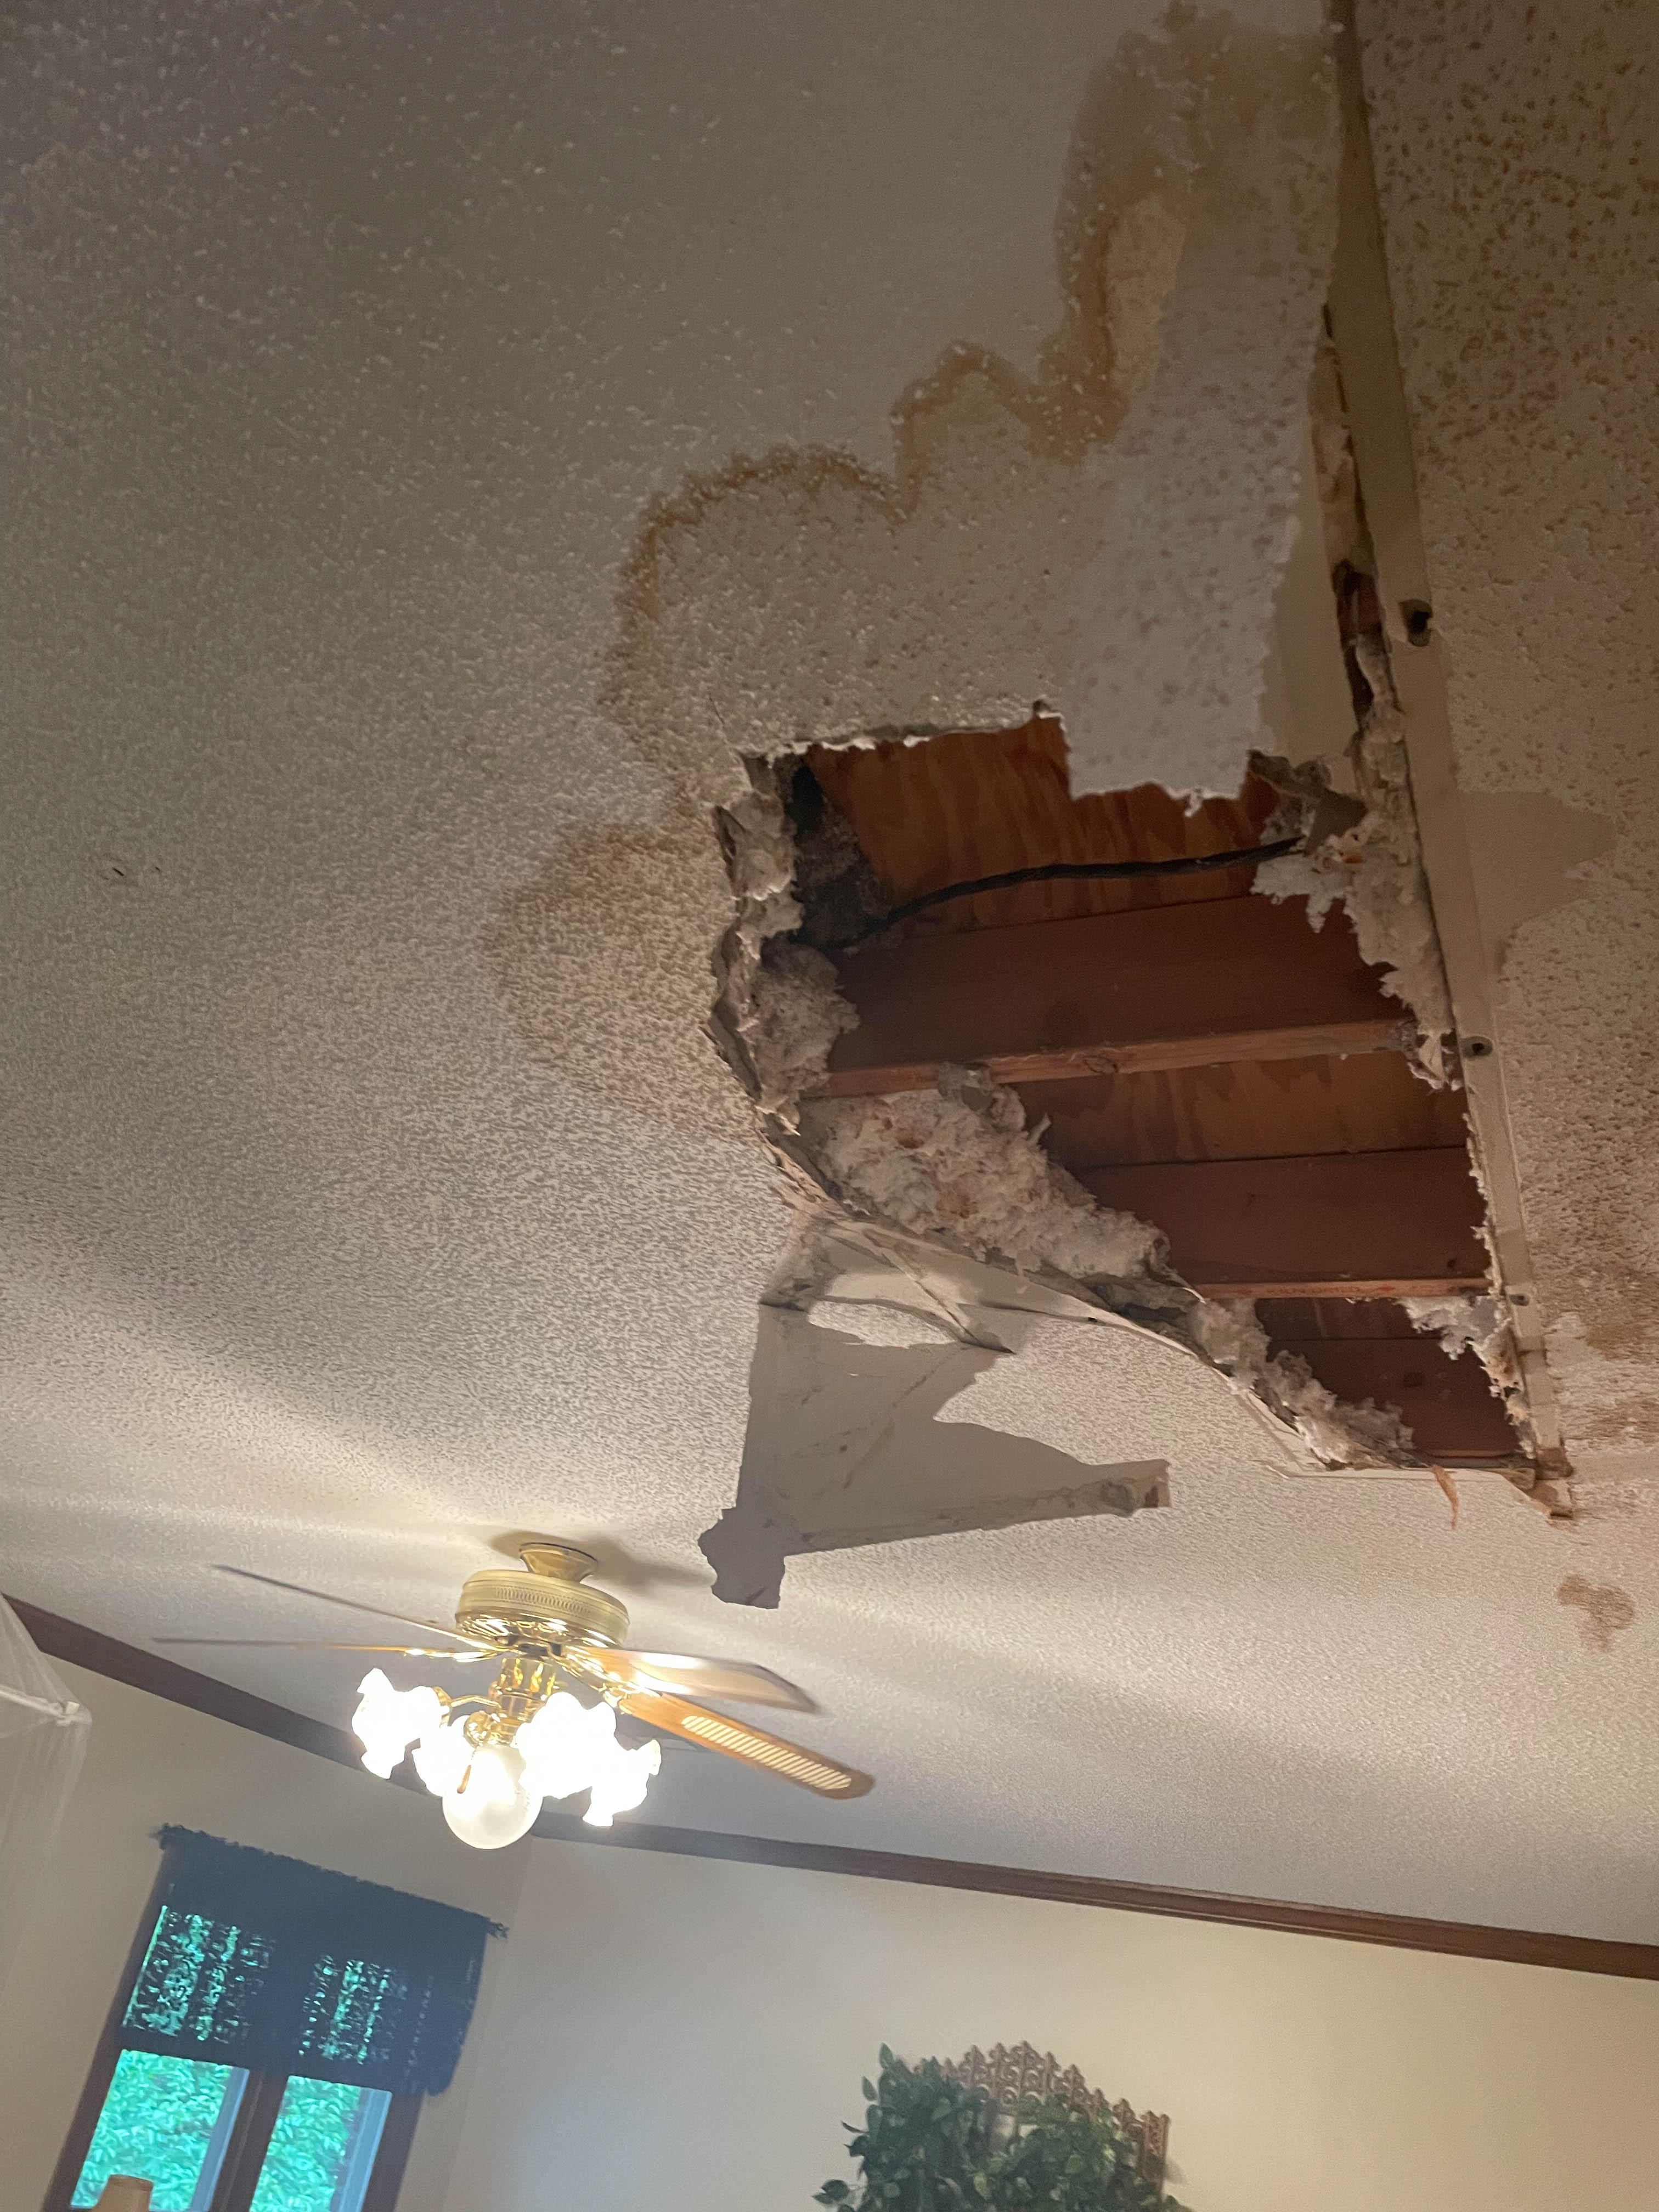 Who to call for Water Damage in your Farragut, TN home area? Call SERVPRO of West Knoxville.